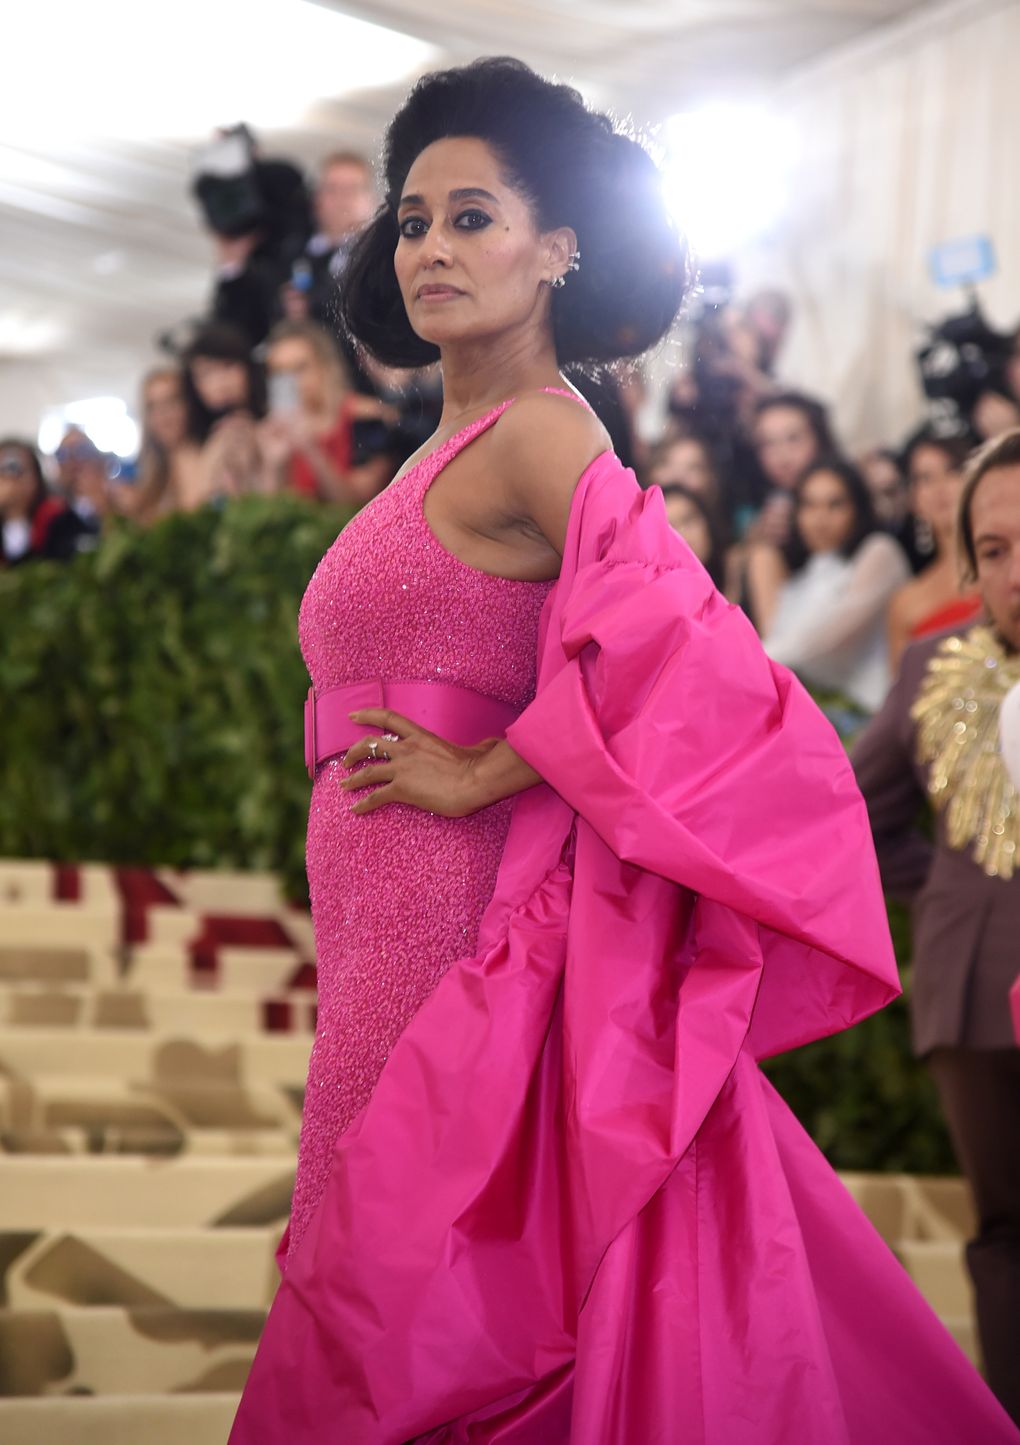 Holy haute couture: Met Gala blends fashion, a little bit of religion ...